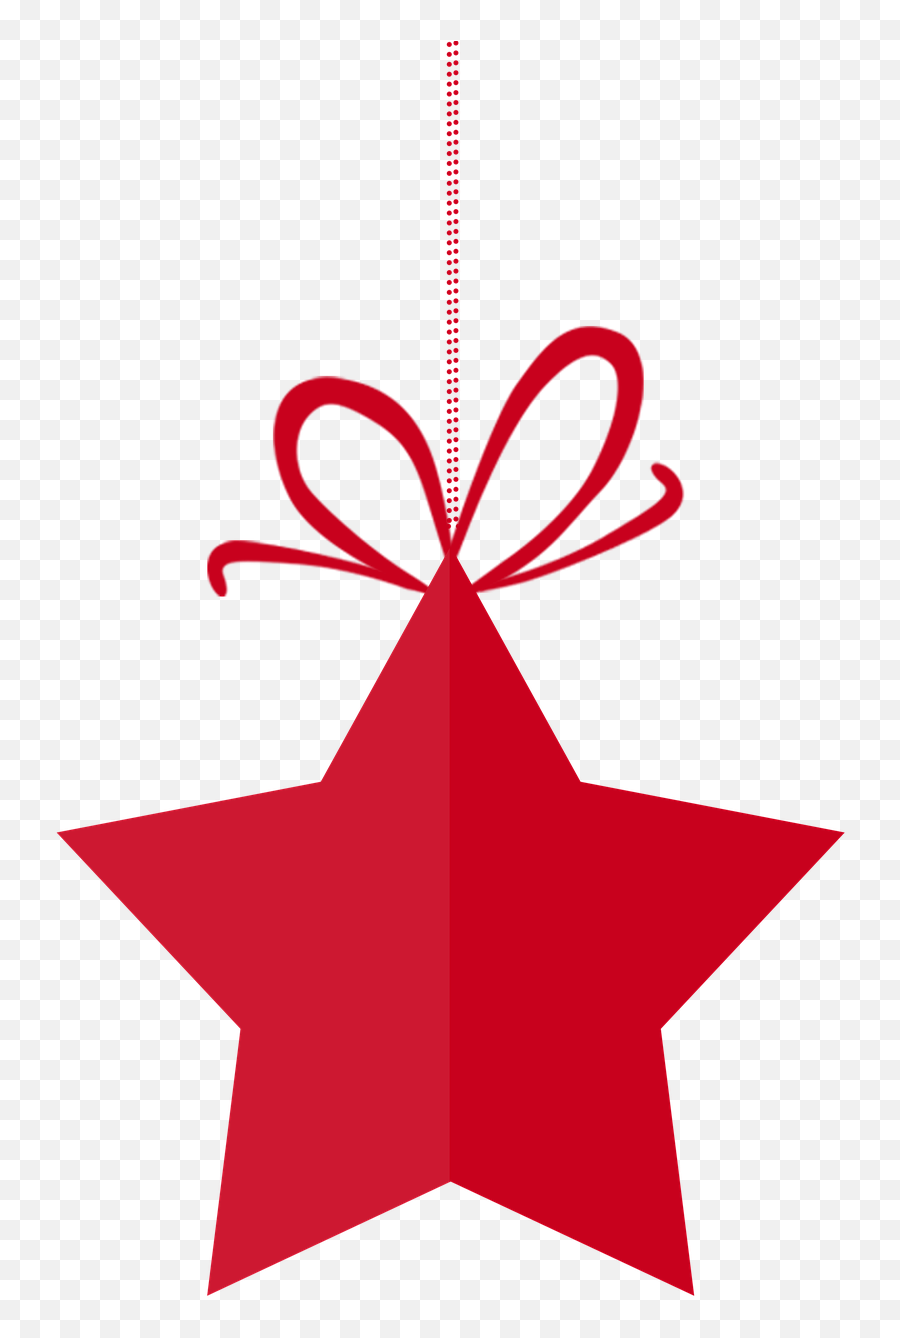 Download Hd Red Christmas Star Png Transparent Image - Star Photoshop,Christmas Star Png